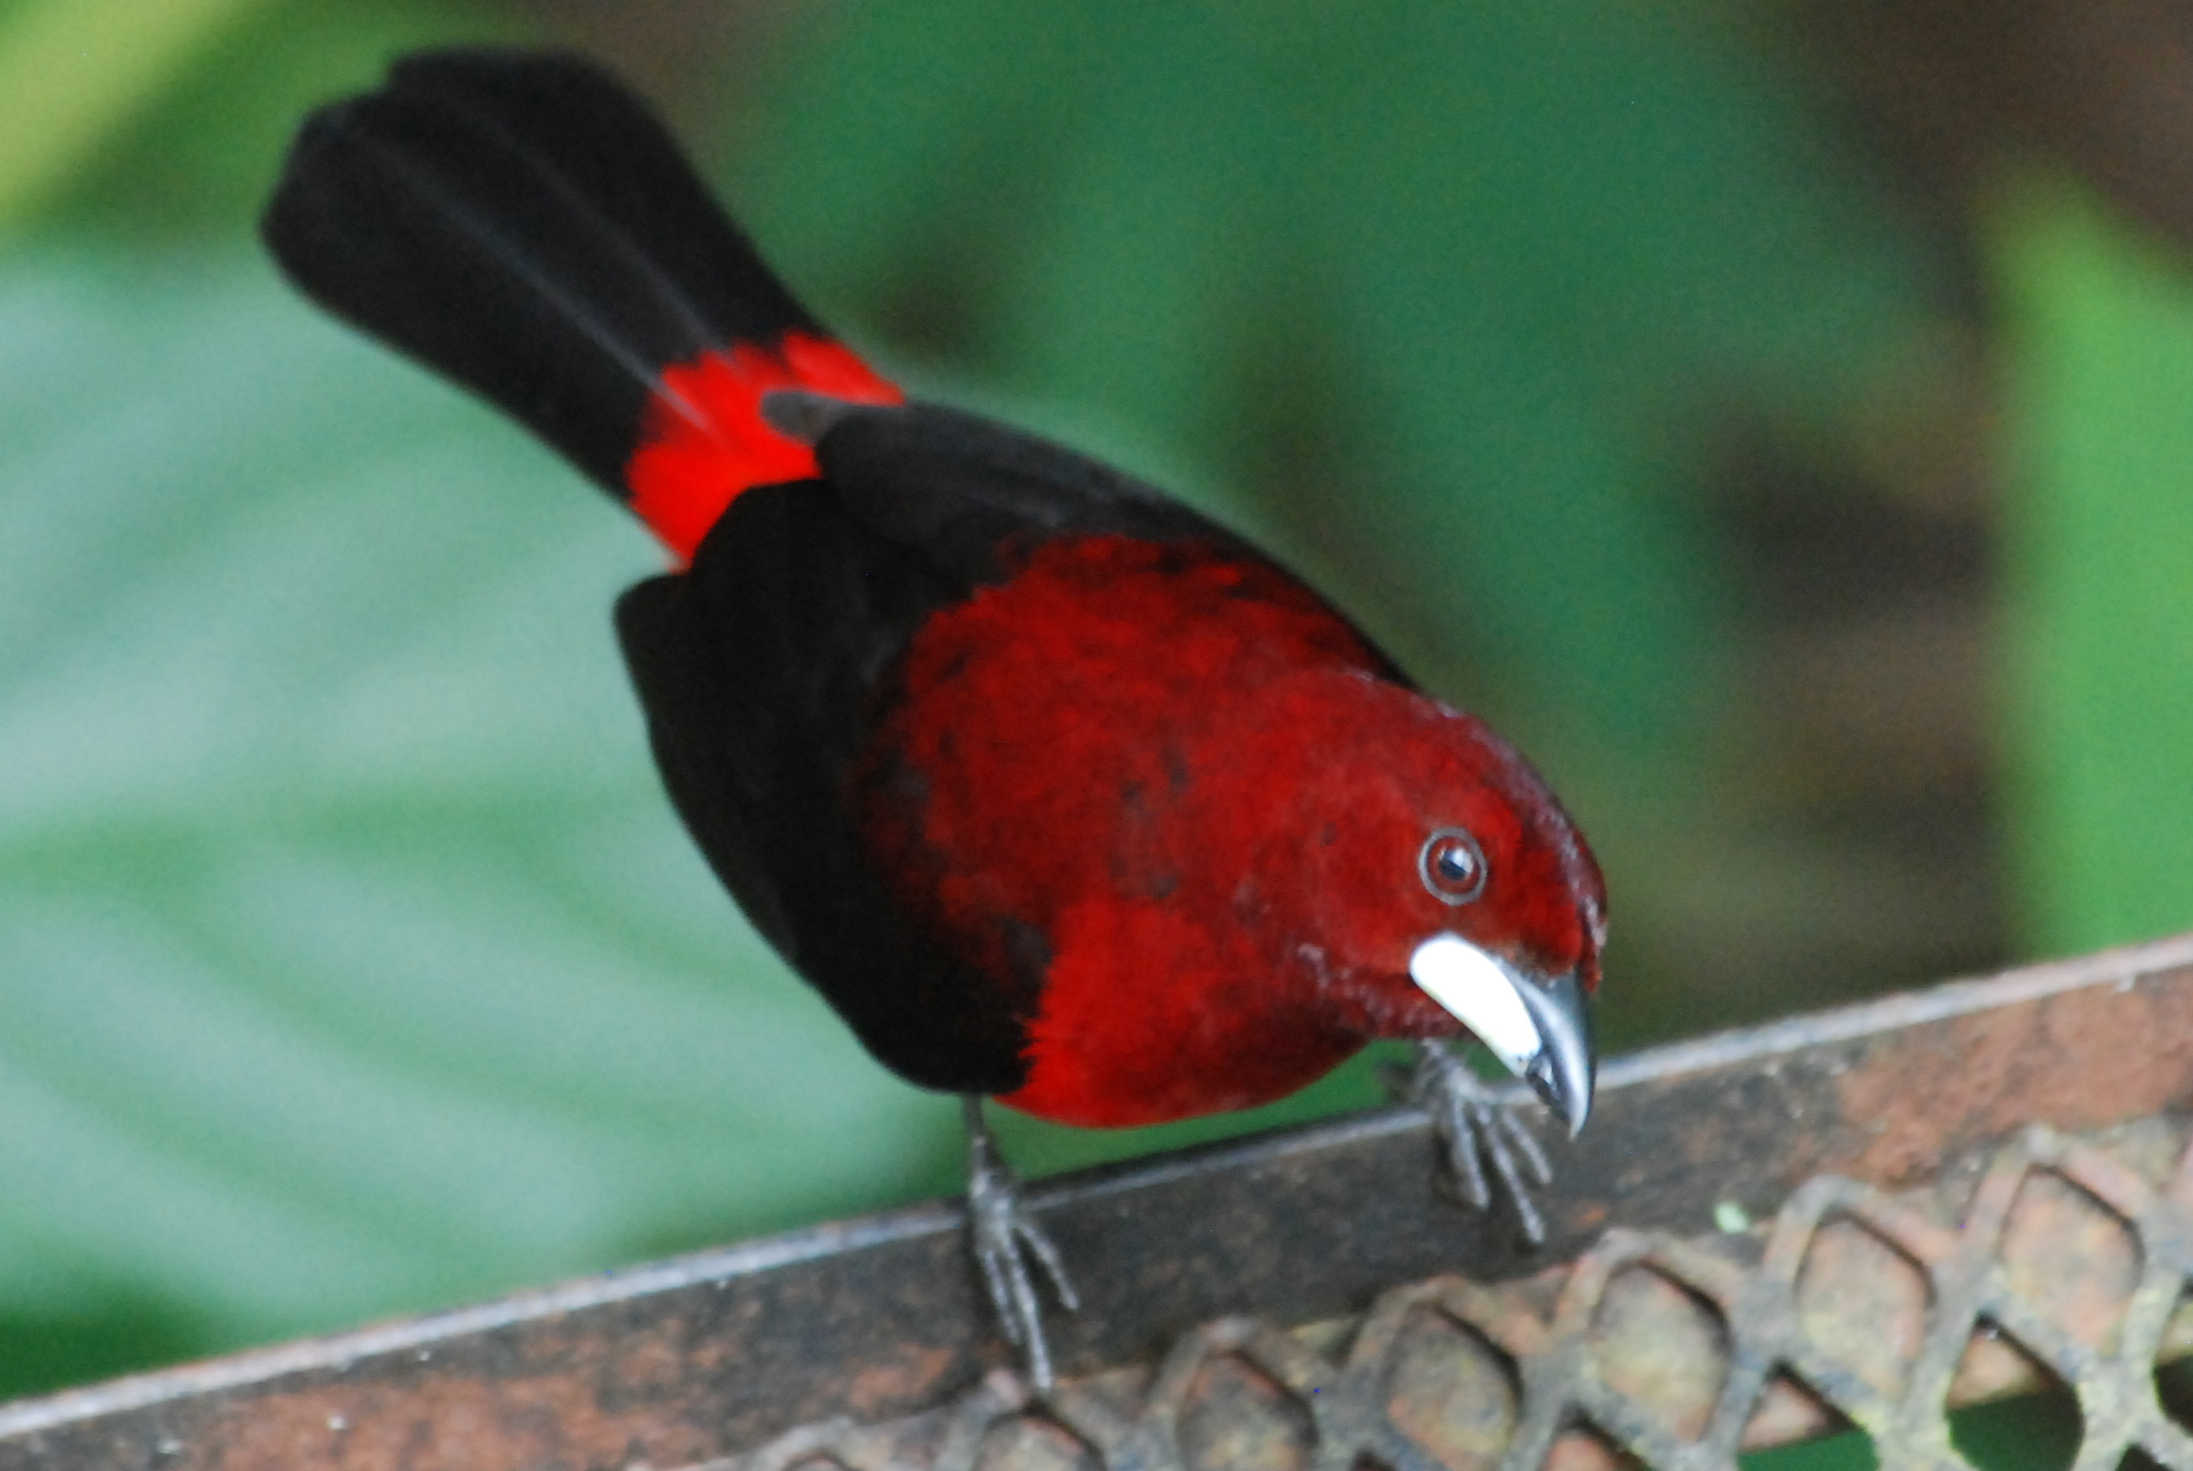 Click picture to see more Crimson-backed Tanagers.